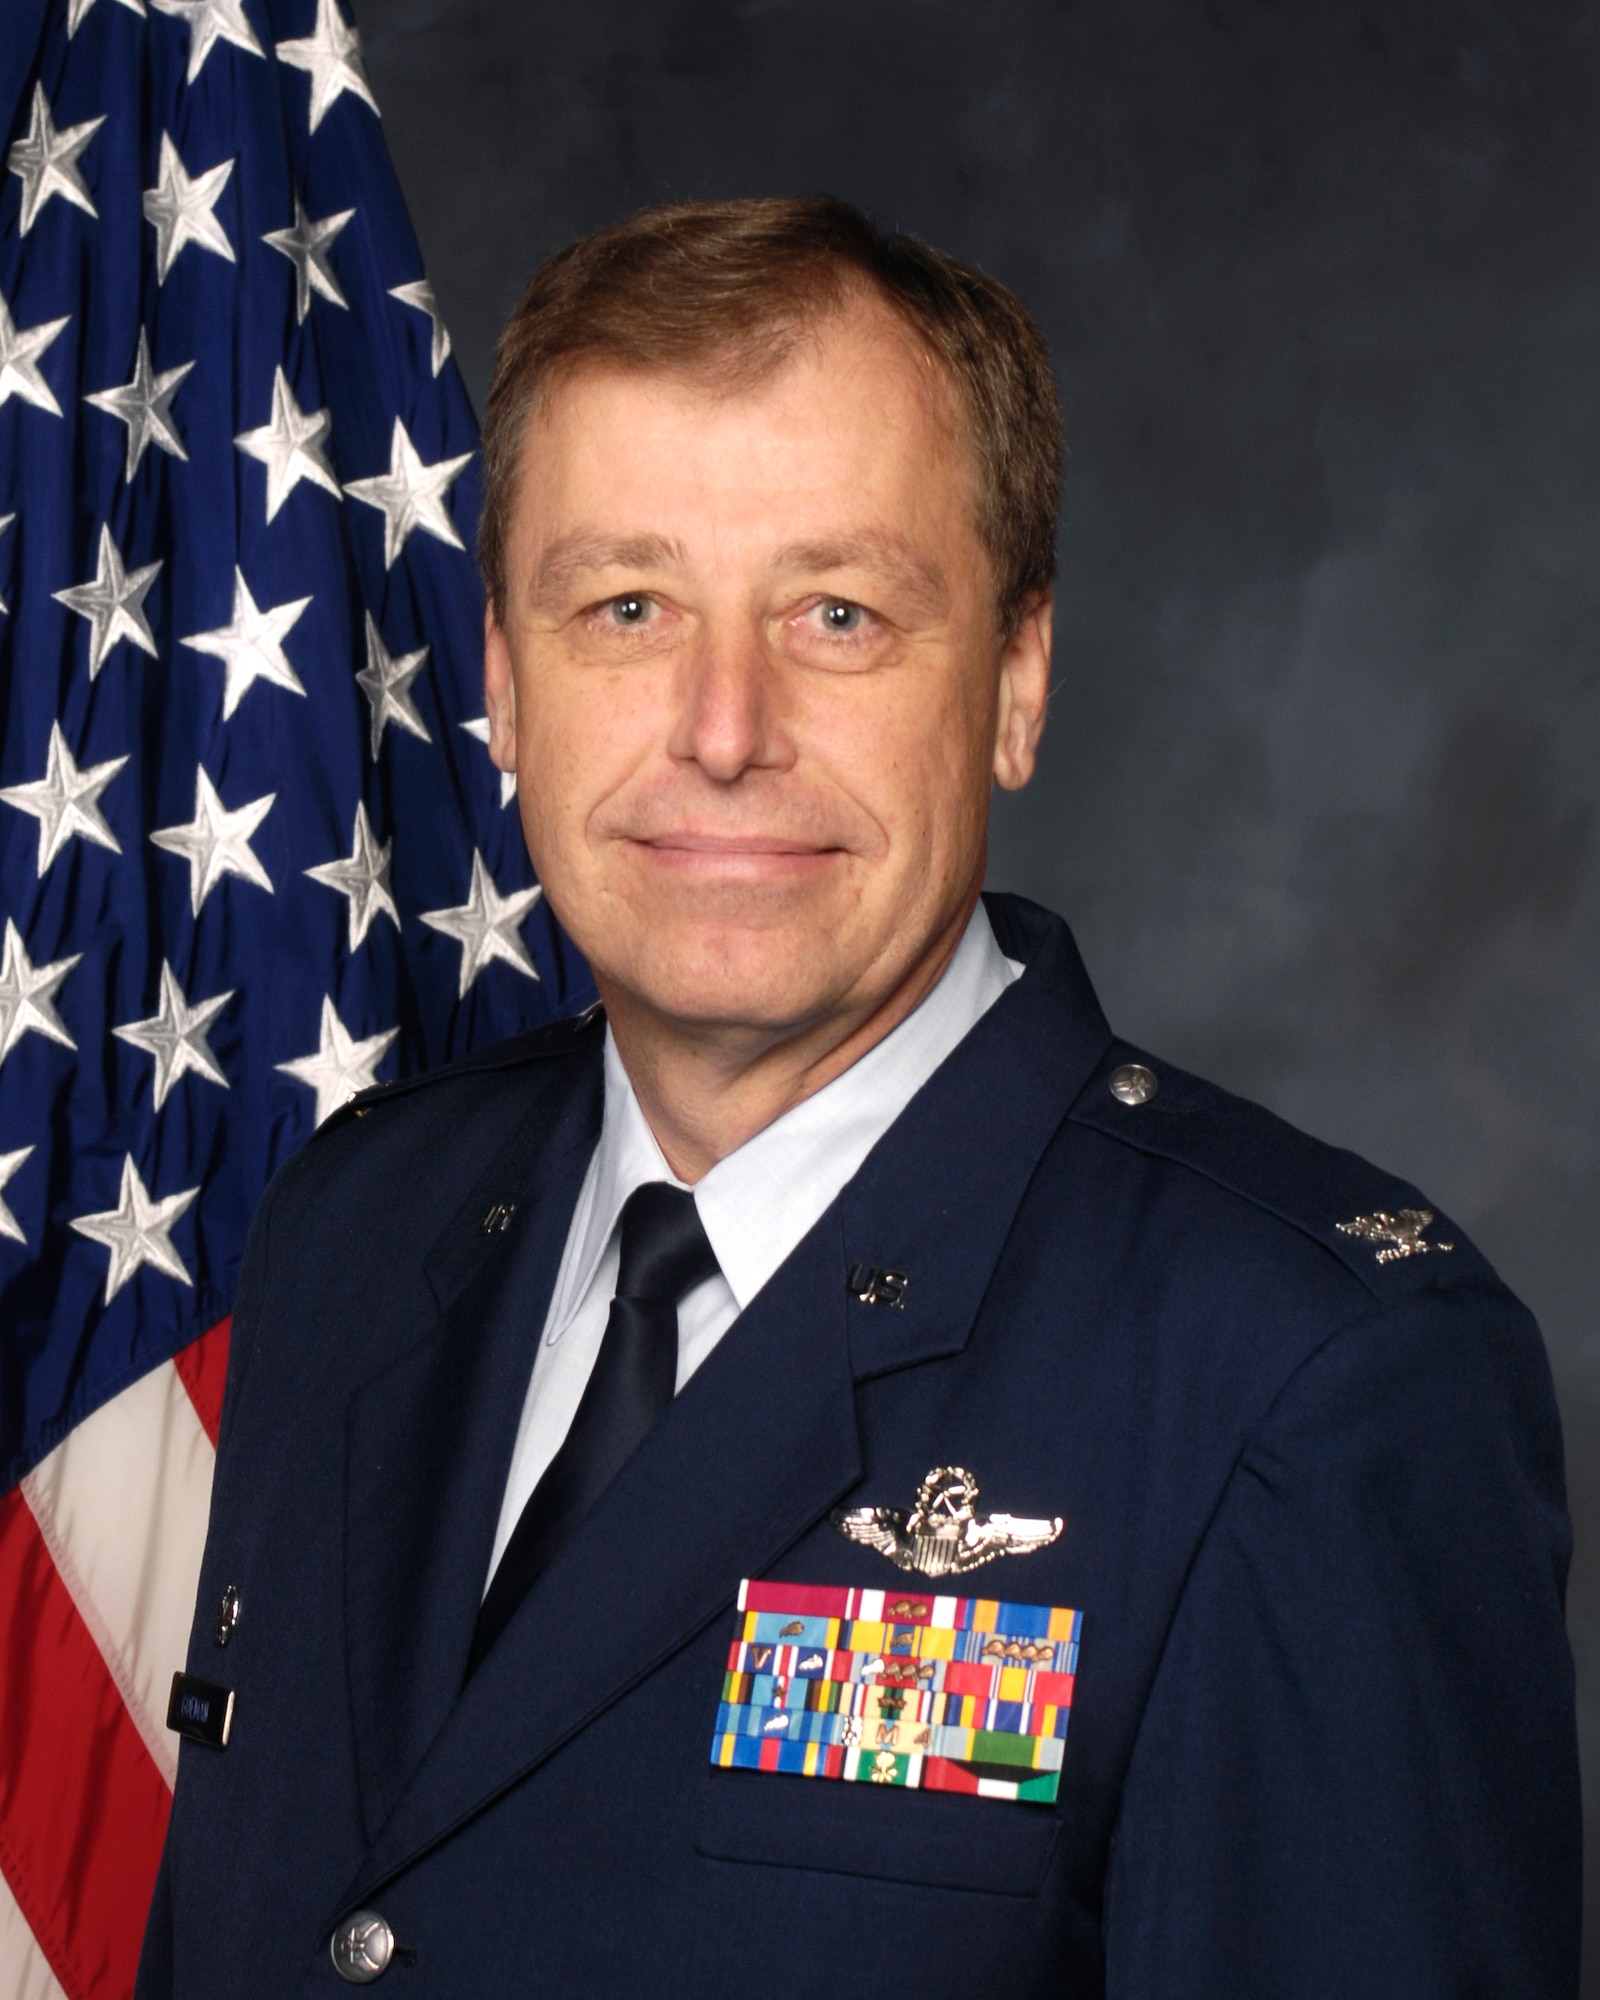 Col. Stephen D. Goeman is the commander of the 445th Airlift Wing, Wright-Patterson Air Force Base, Ohio.